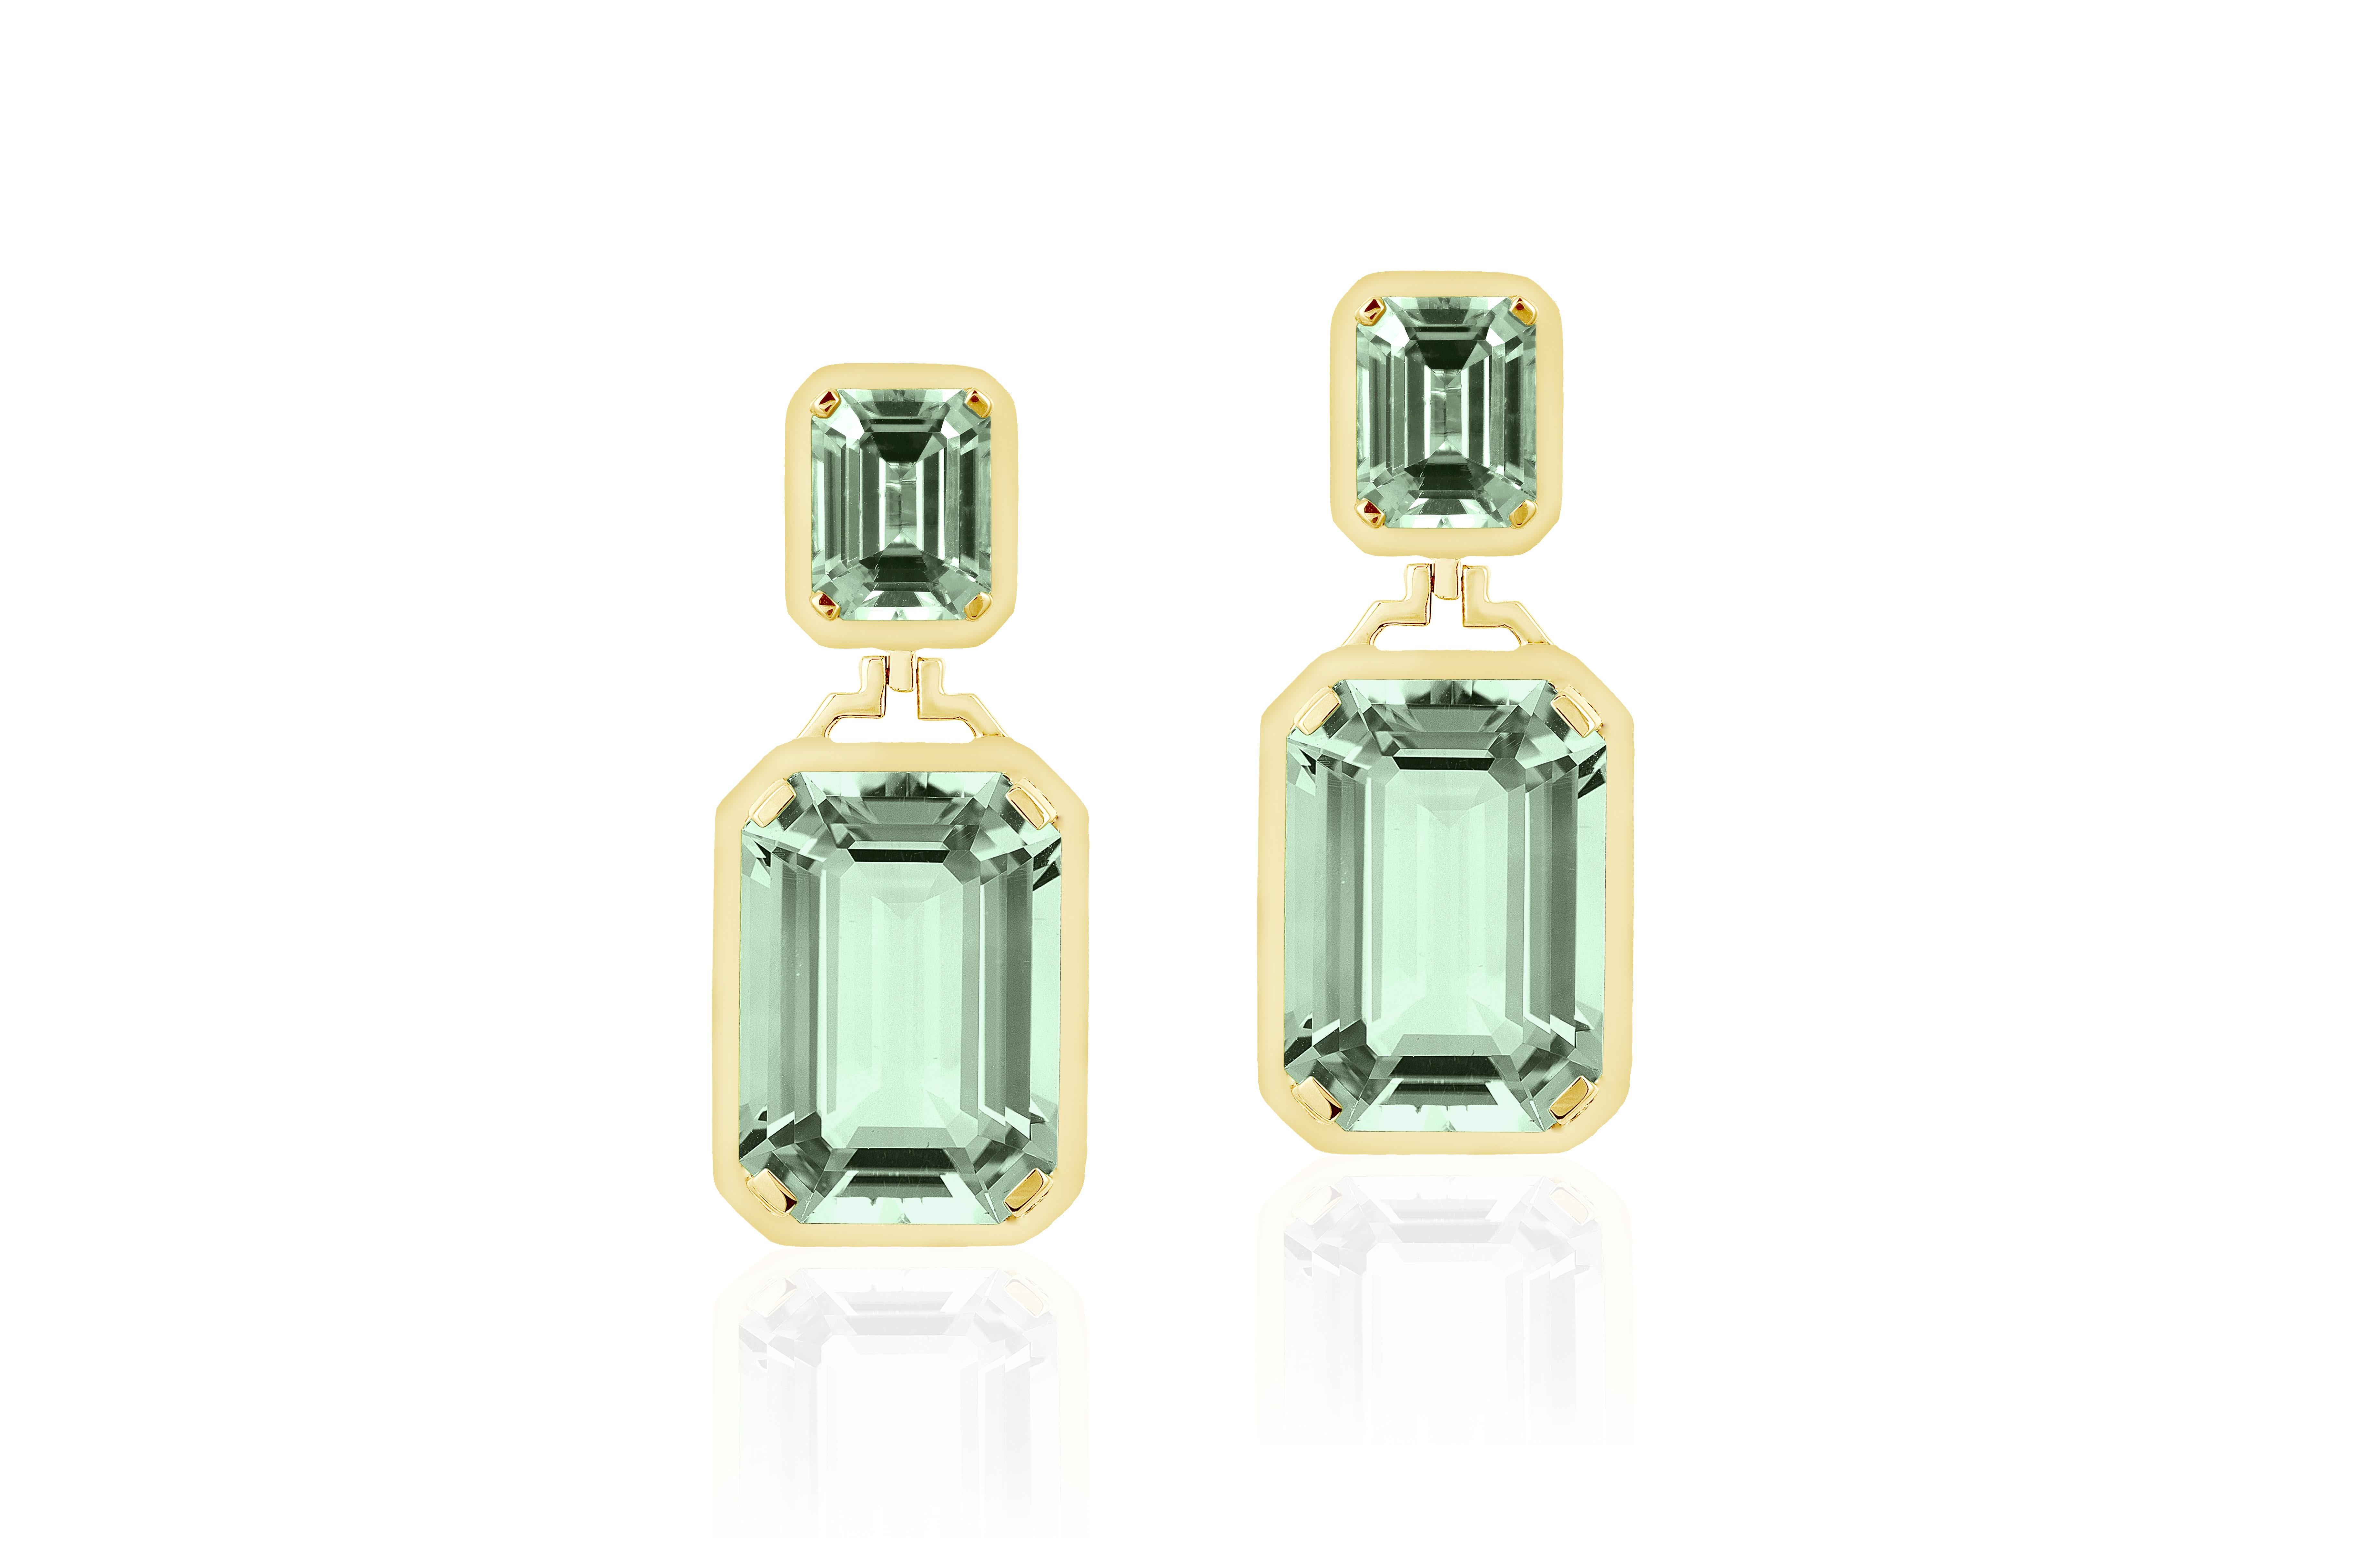 Double Emerald Cut Prasiolite Long Earrings, from 'Gossip' Collection

Stone Size: 10 x 8 - 20 x 14 mm